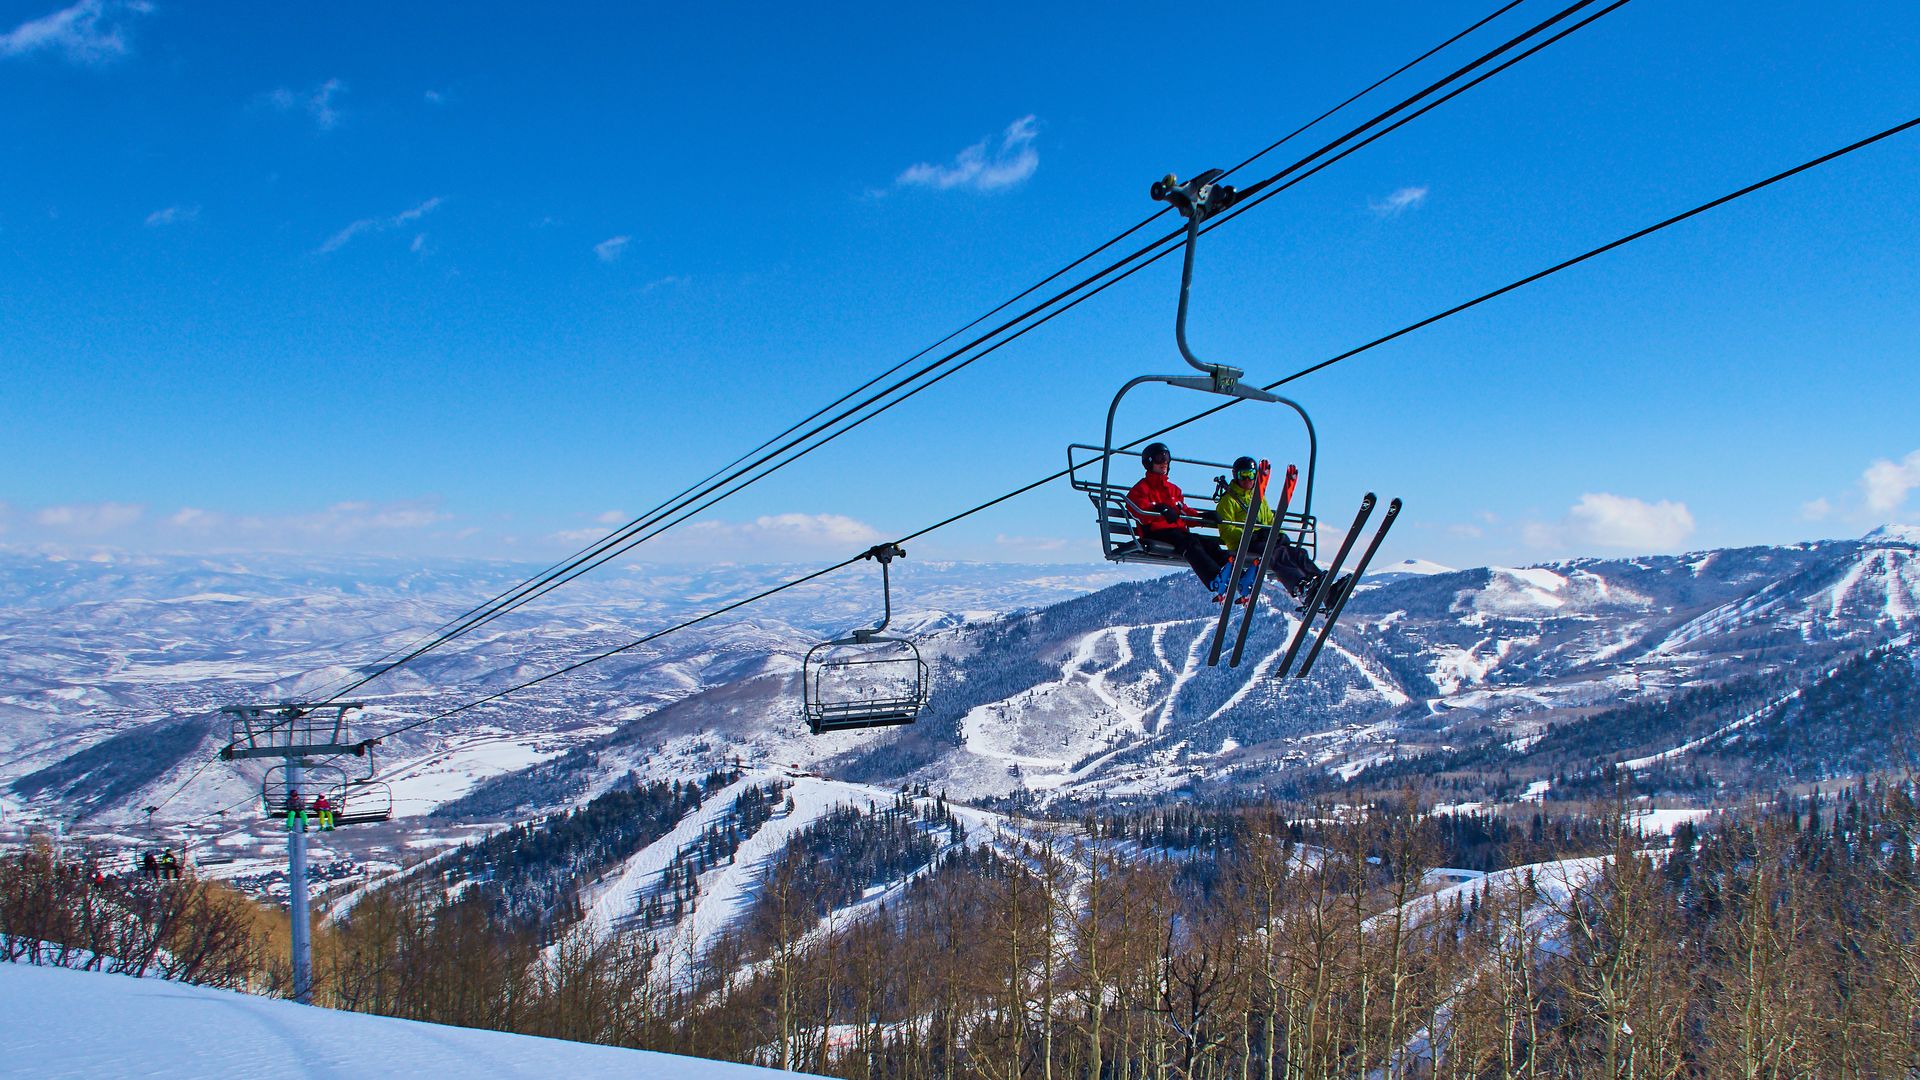 Skiers are sitting in a chair lift with panoramic view of the Wasatch Range in the Rocky Mountains on March 02, 2015 in Park City, Utah, United States. 